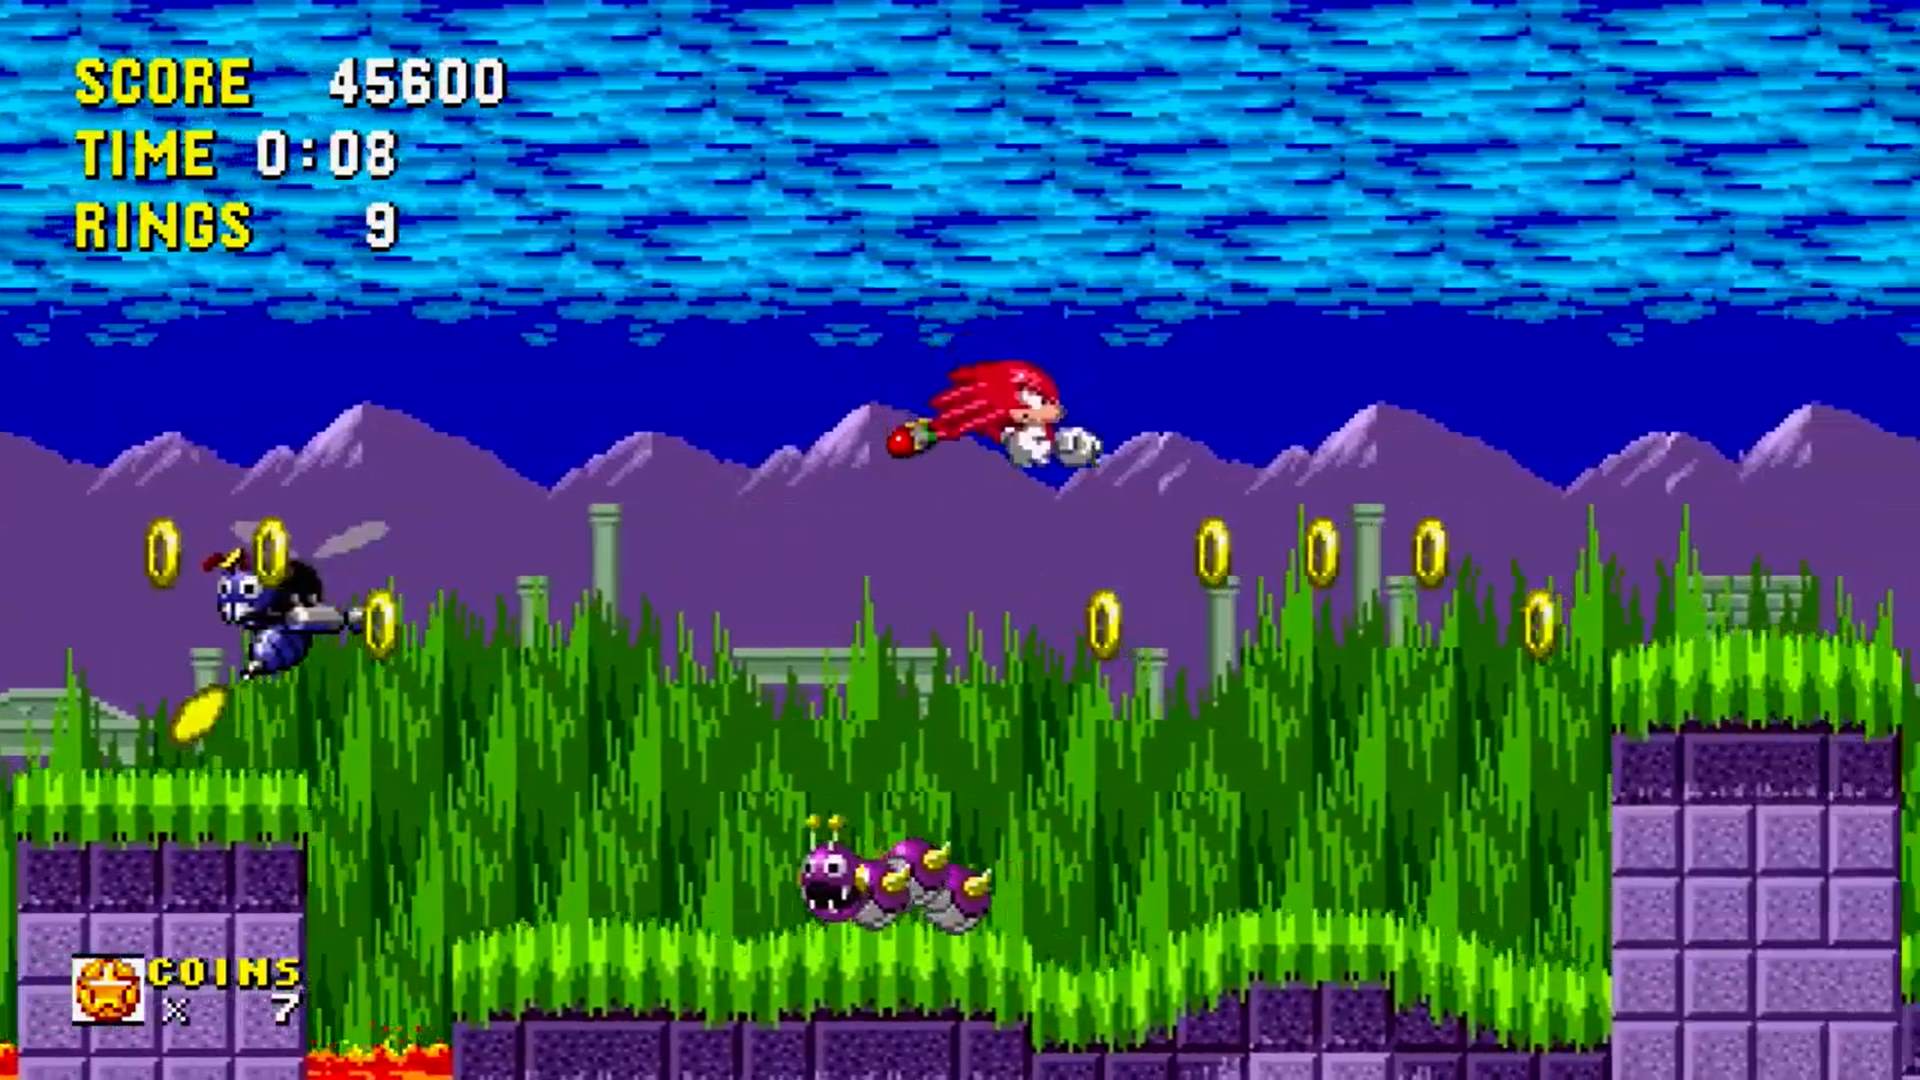 Save Big On Sonic Origins Preorders Ahead Of Launch This Week - GameSpot